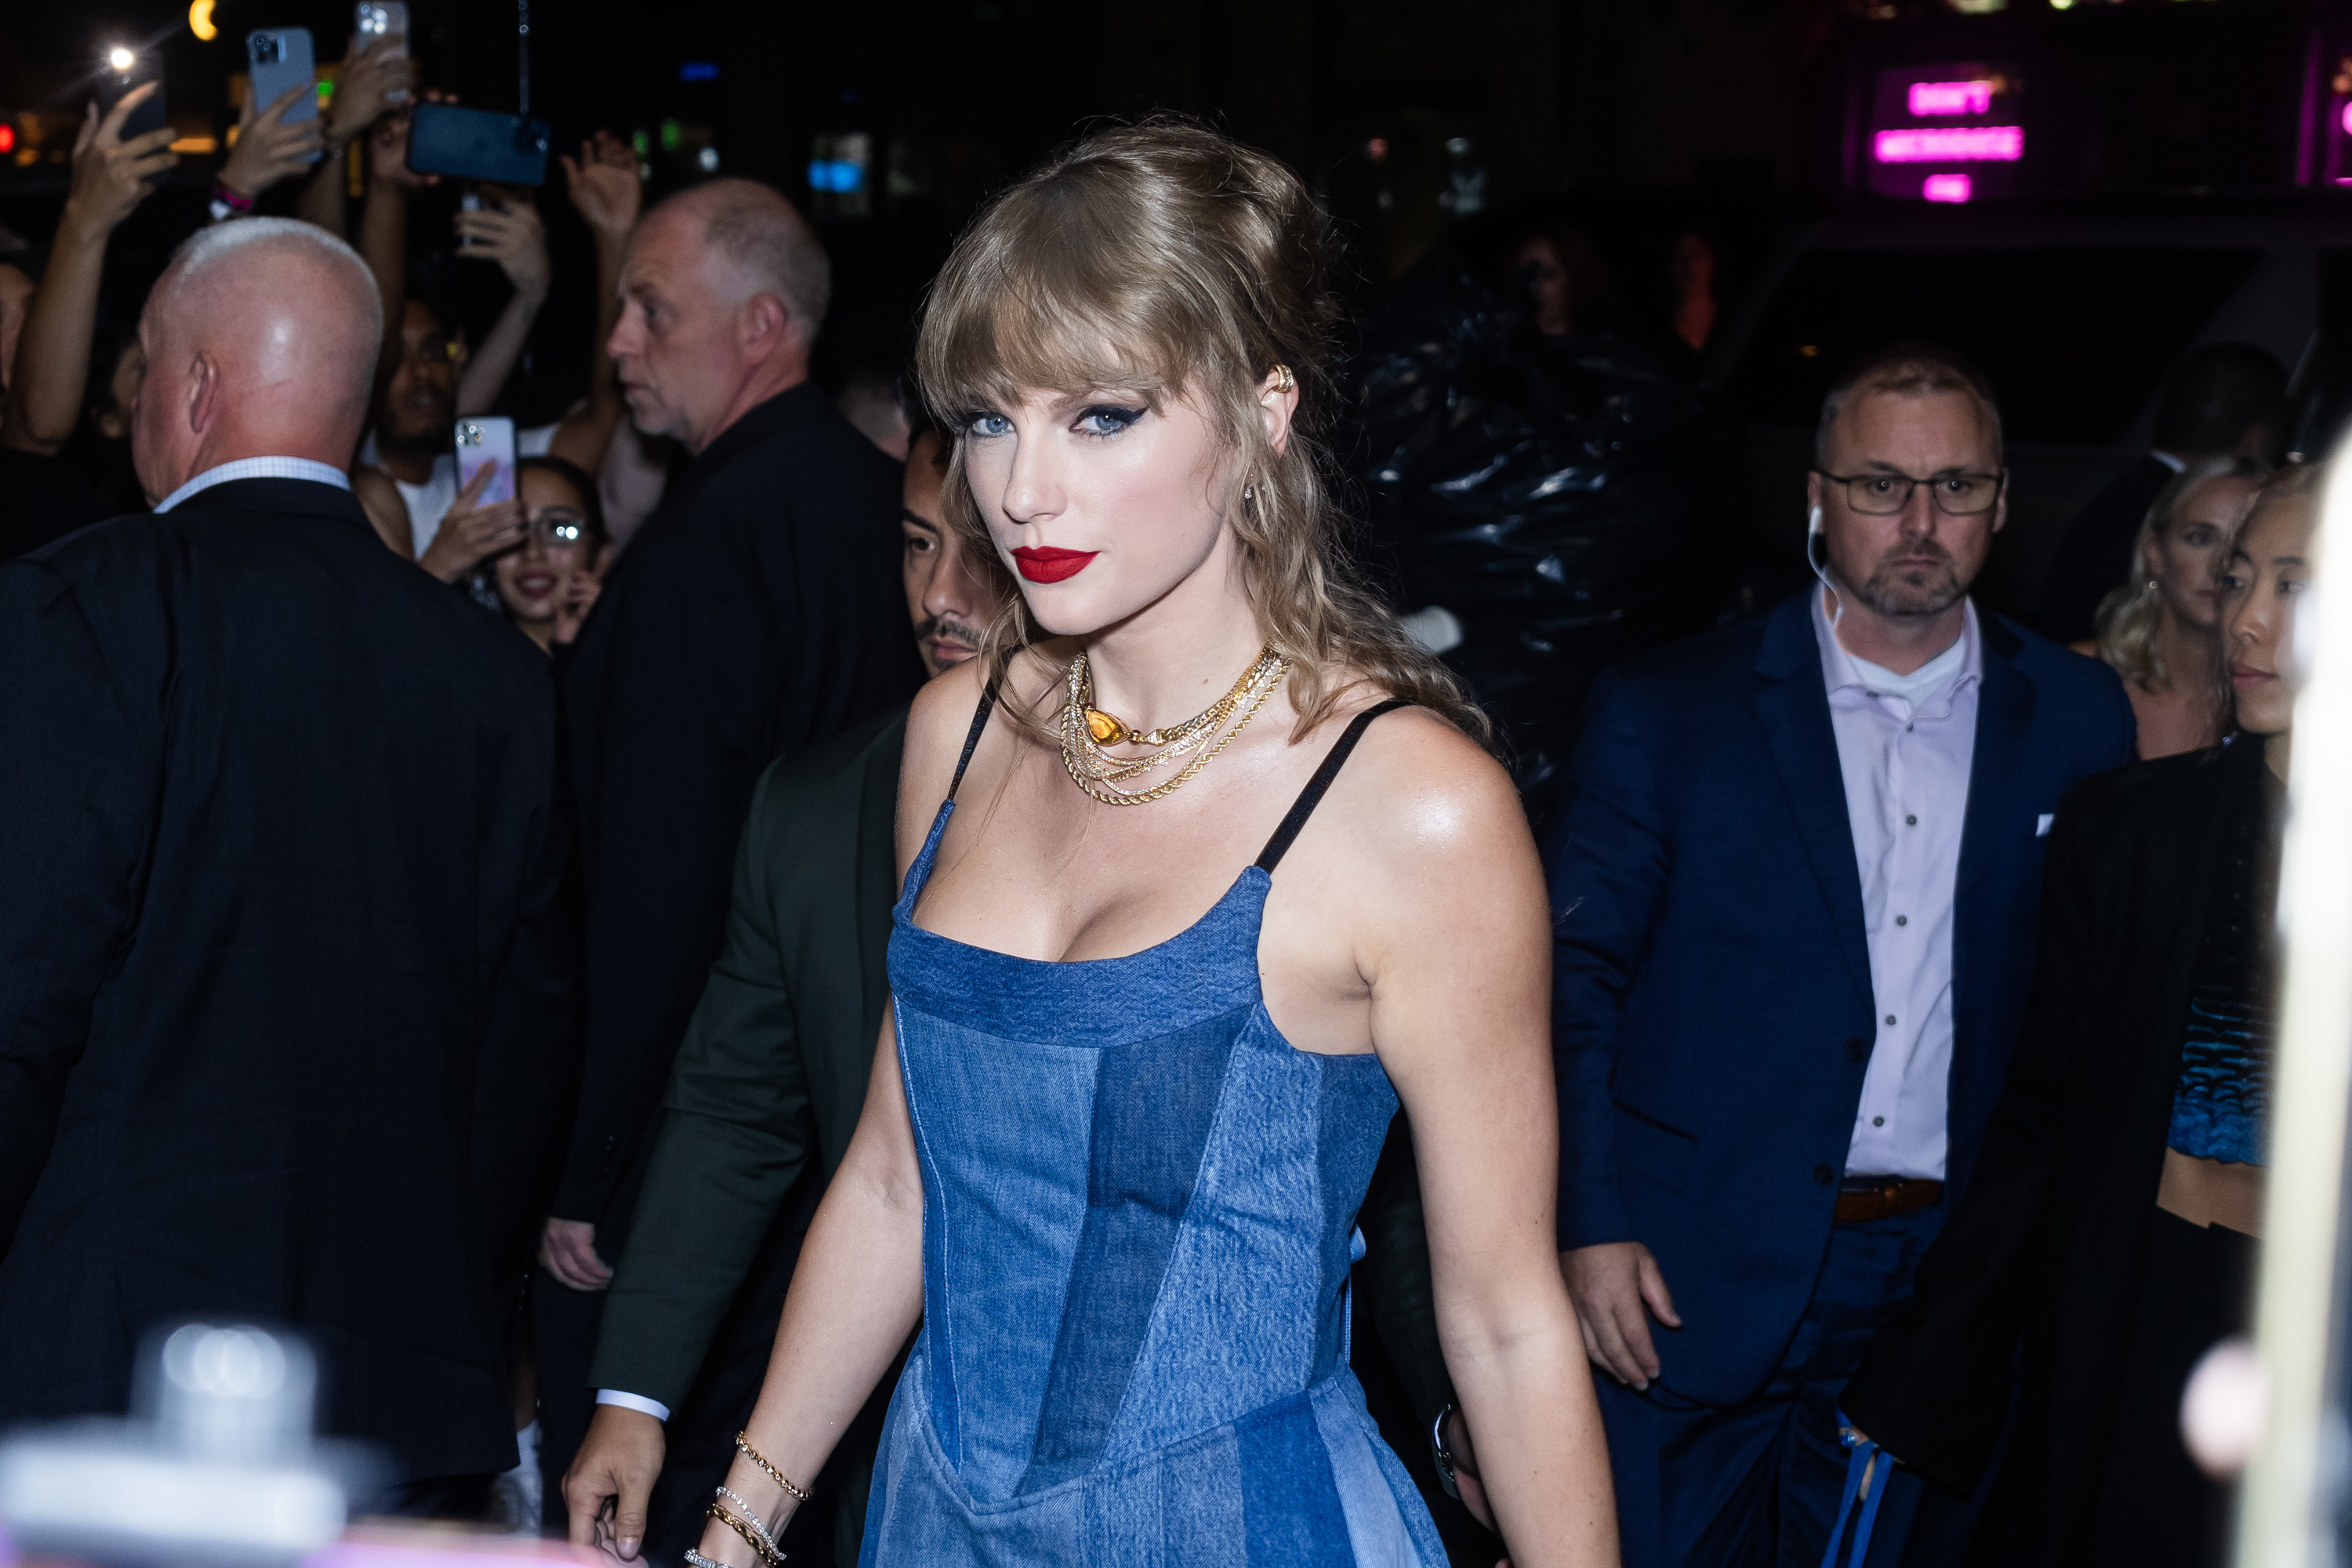 Closeup of Taylor Swift at an event